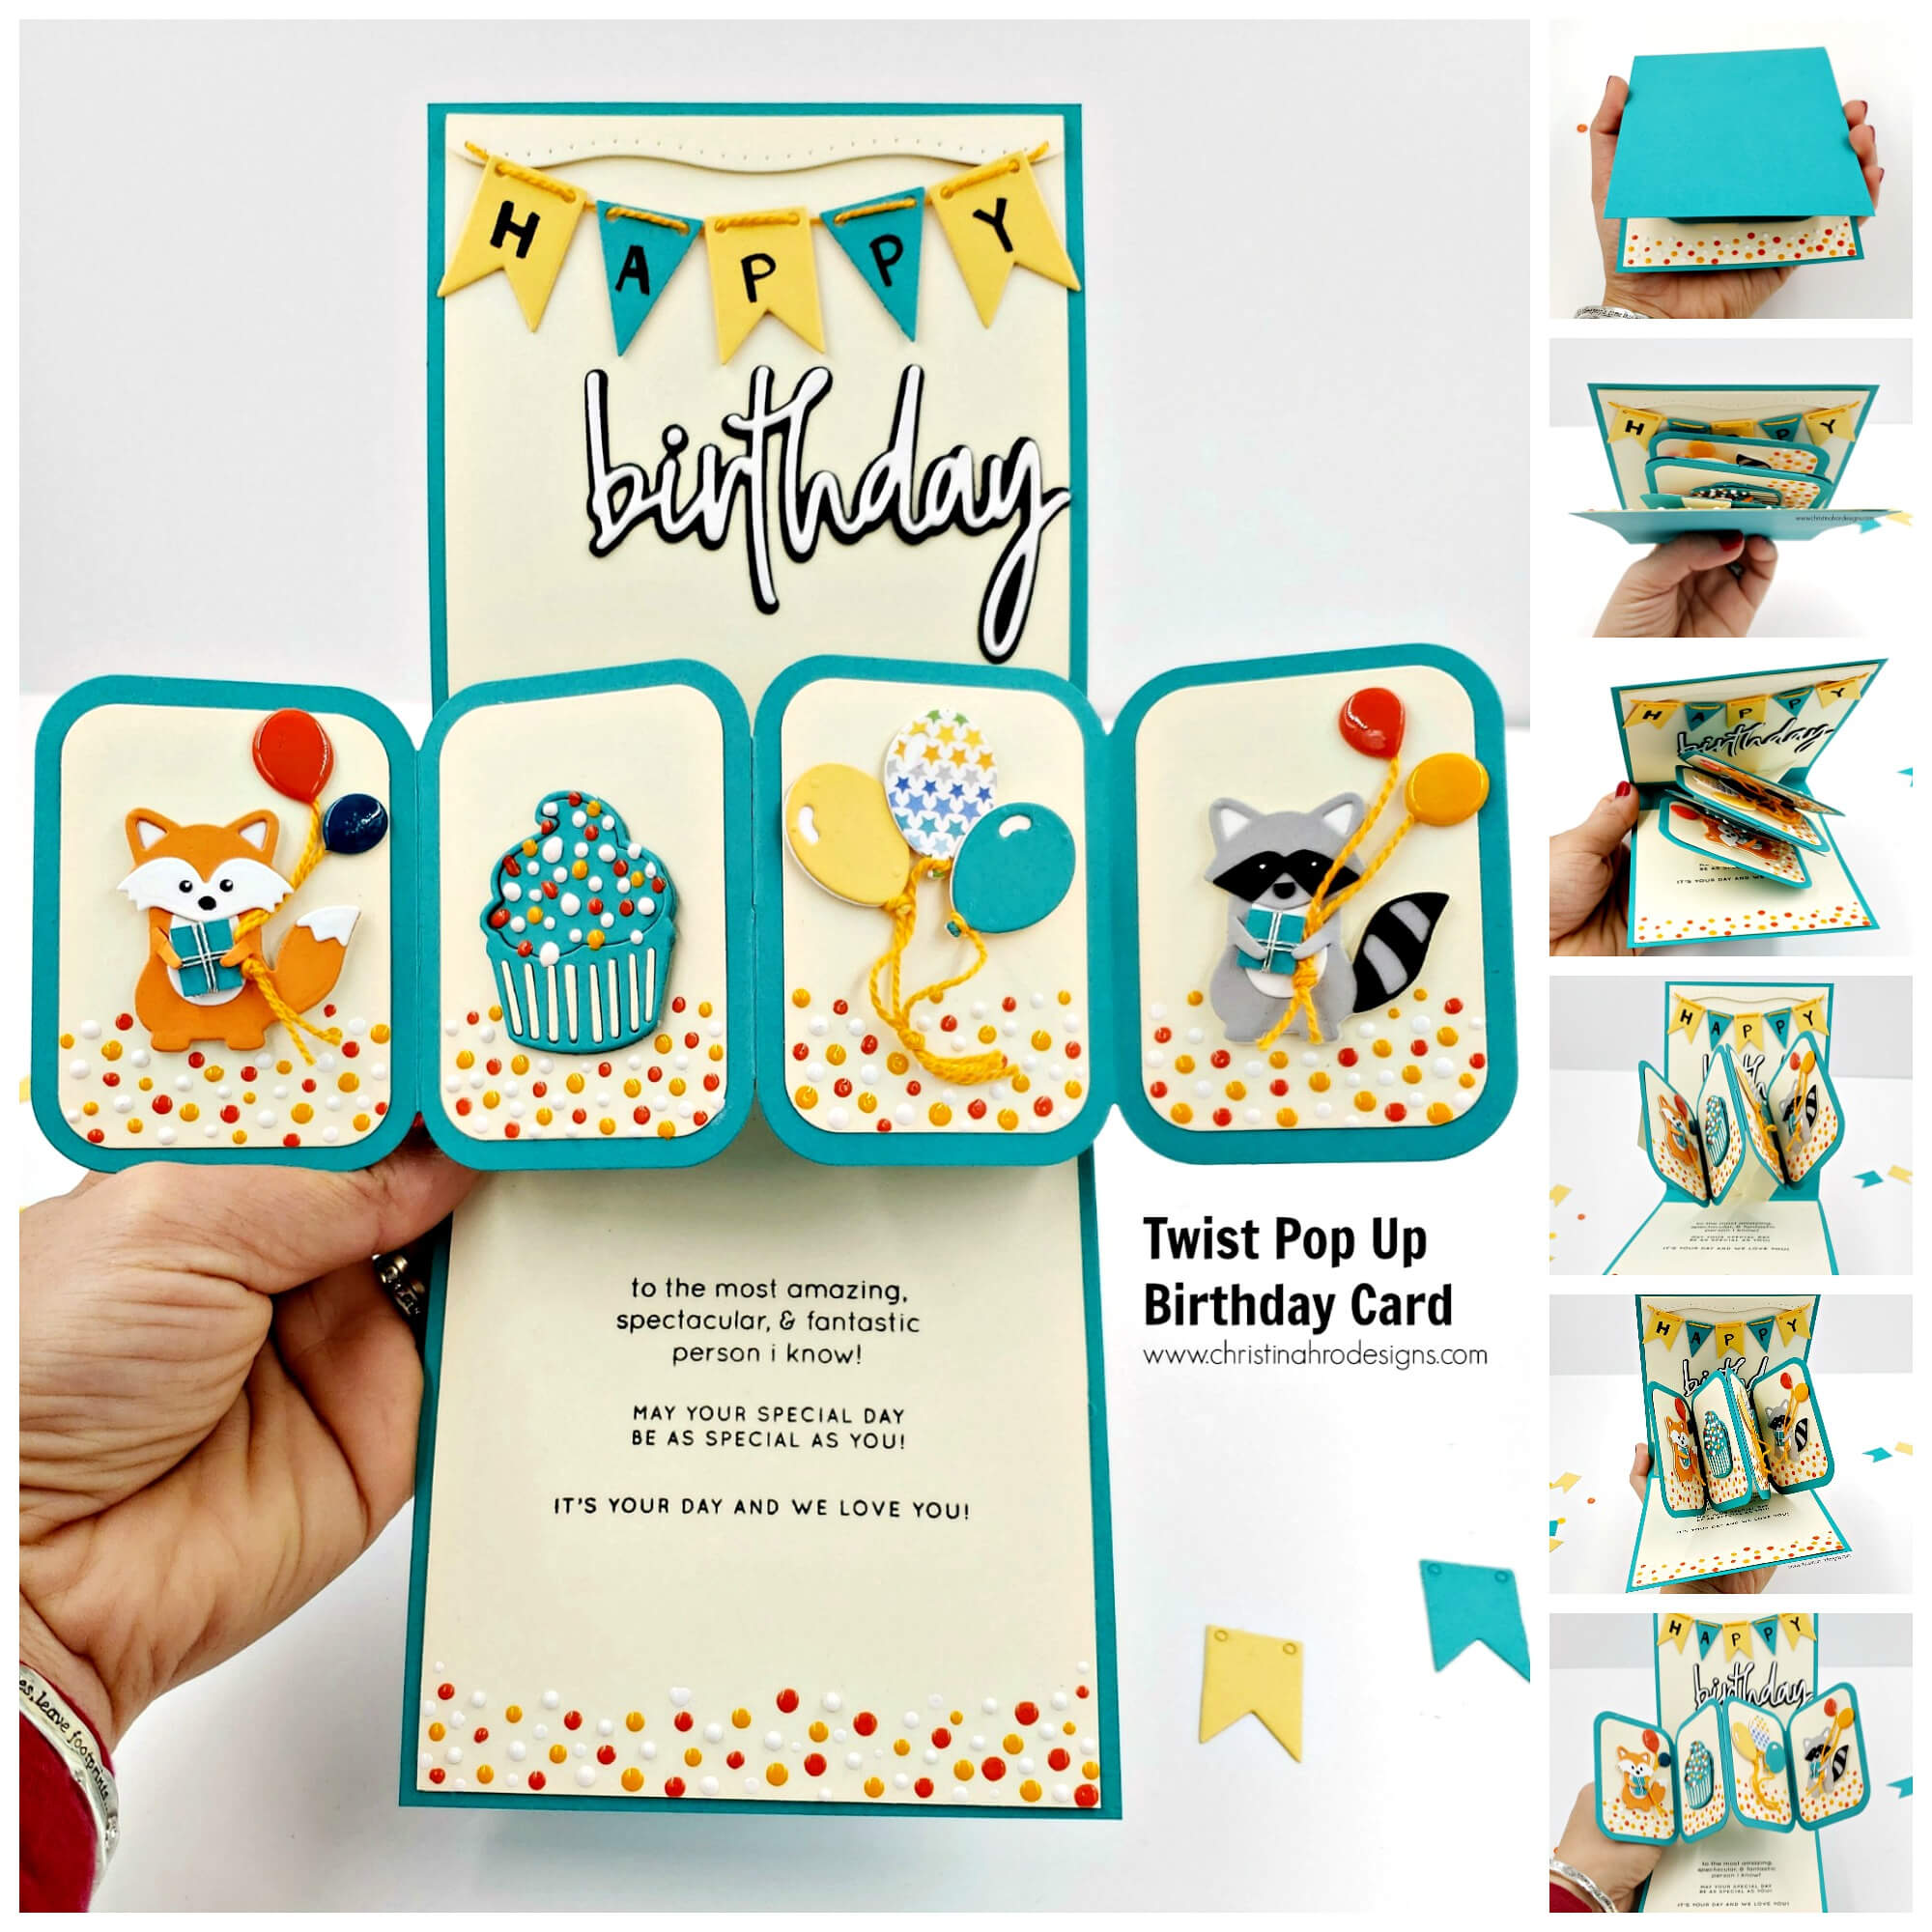 How To Make A Twist Pop Up Birthday Card | Christina Hor Designs Within Twisting Hearts Pop Up Card Template